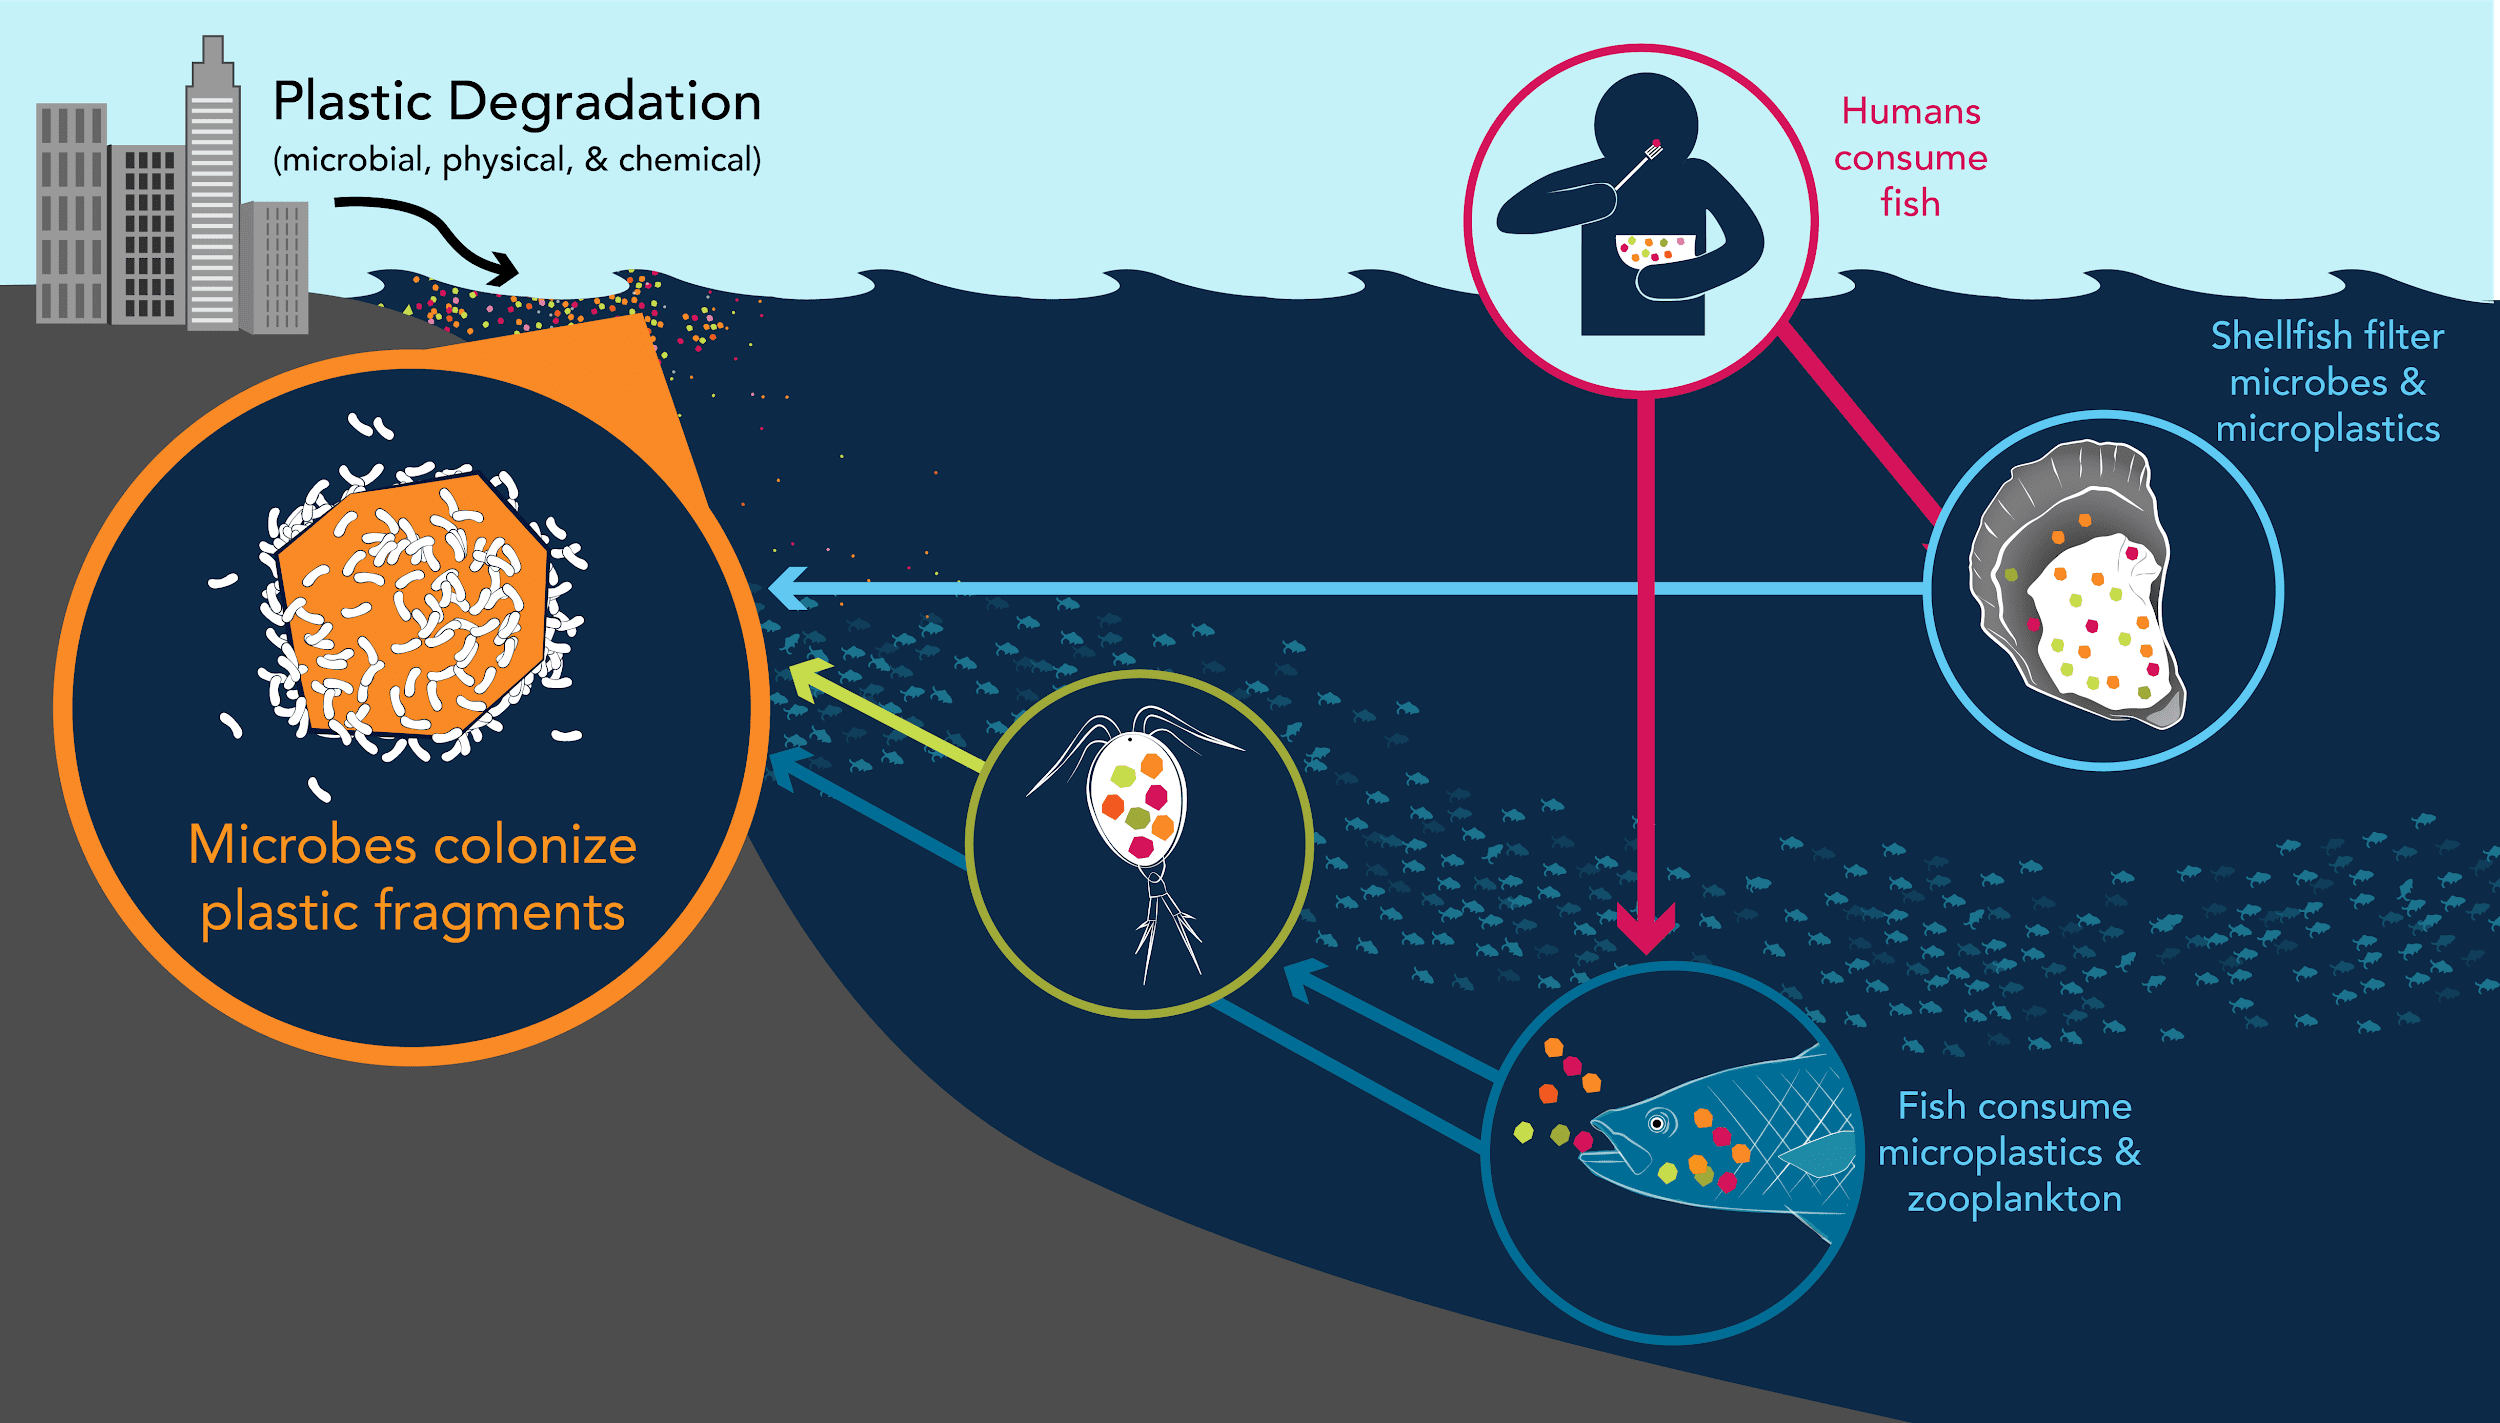 Plastics enter the ocean through many sources for example from runoff,  rivers, and ground water. Plastics enter the food chain by consumption by plankton such as copepods, the most abundant multicellular organisms in the ocean.  Fish then eat the copepods and humans consume the fish, bringing the plastics full circle back to humans.
(Illustration by Natalie Renier ©Woods Hole Oceanographic Institution) 

